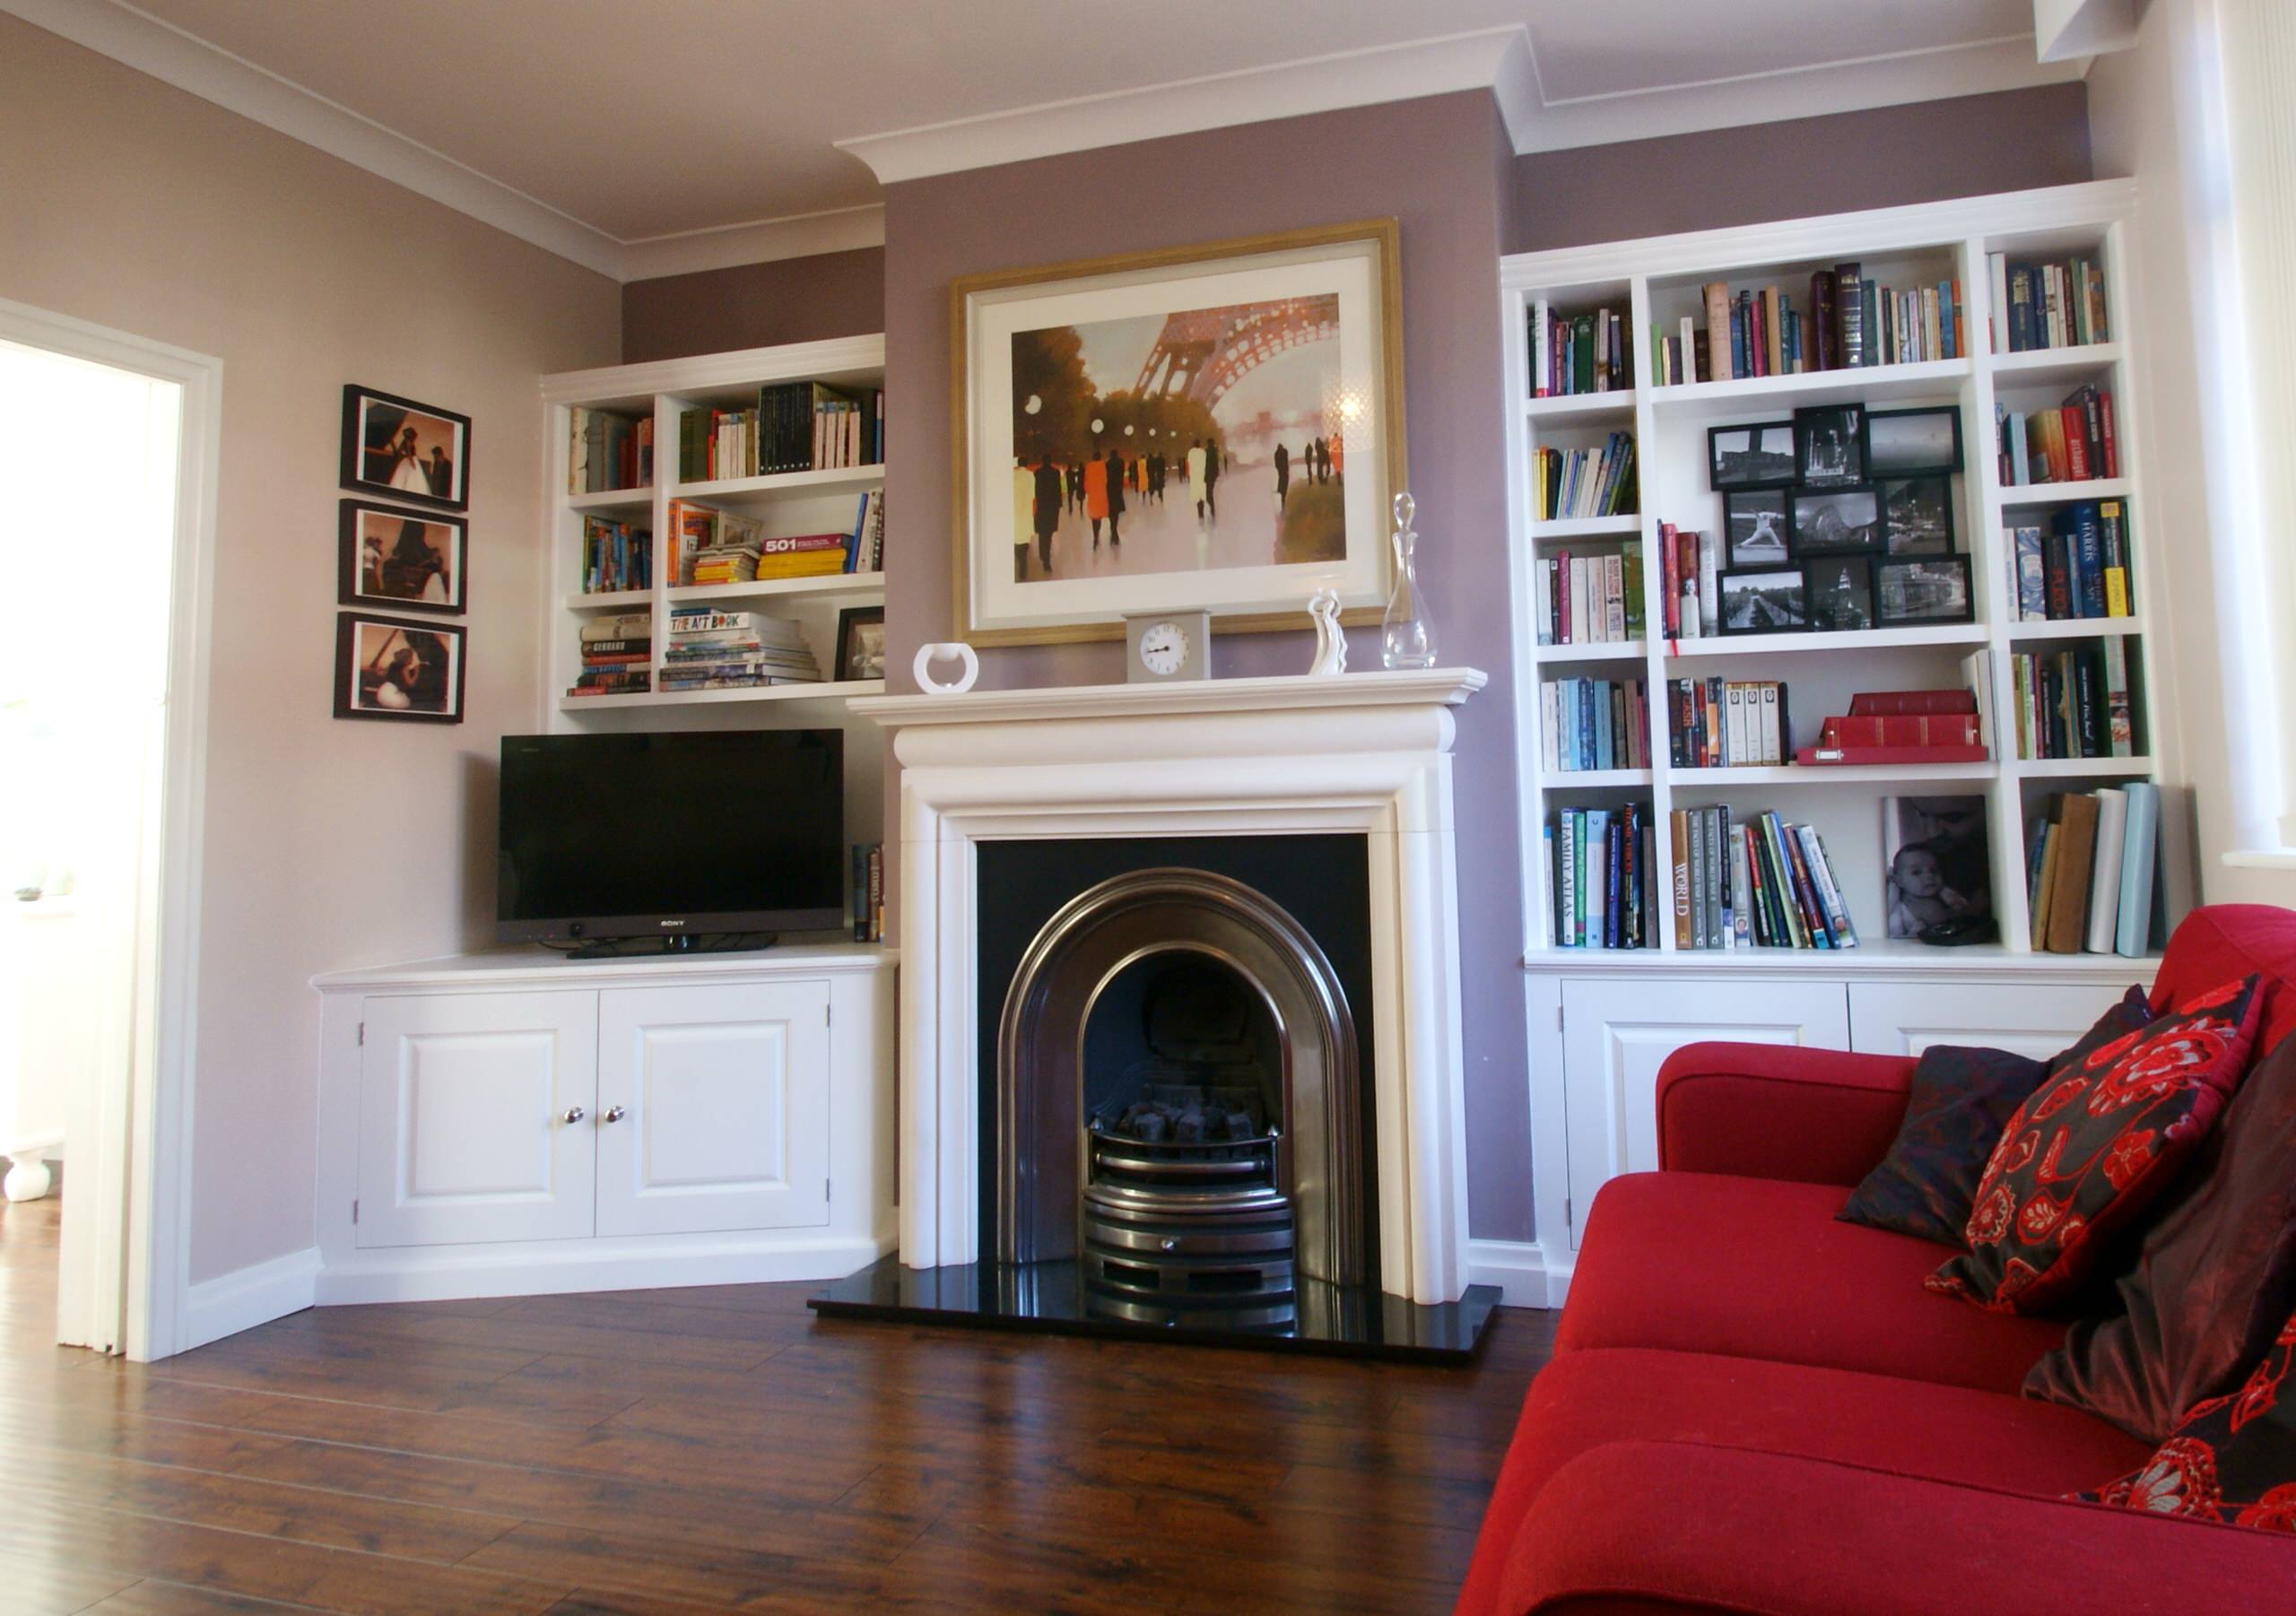 Bespoke Classic Alcove Units with Raised Panel Doors, Shelf Dividers and Angled